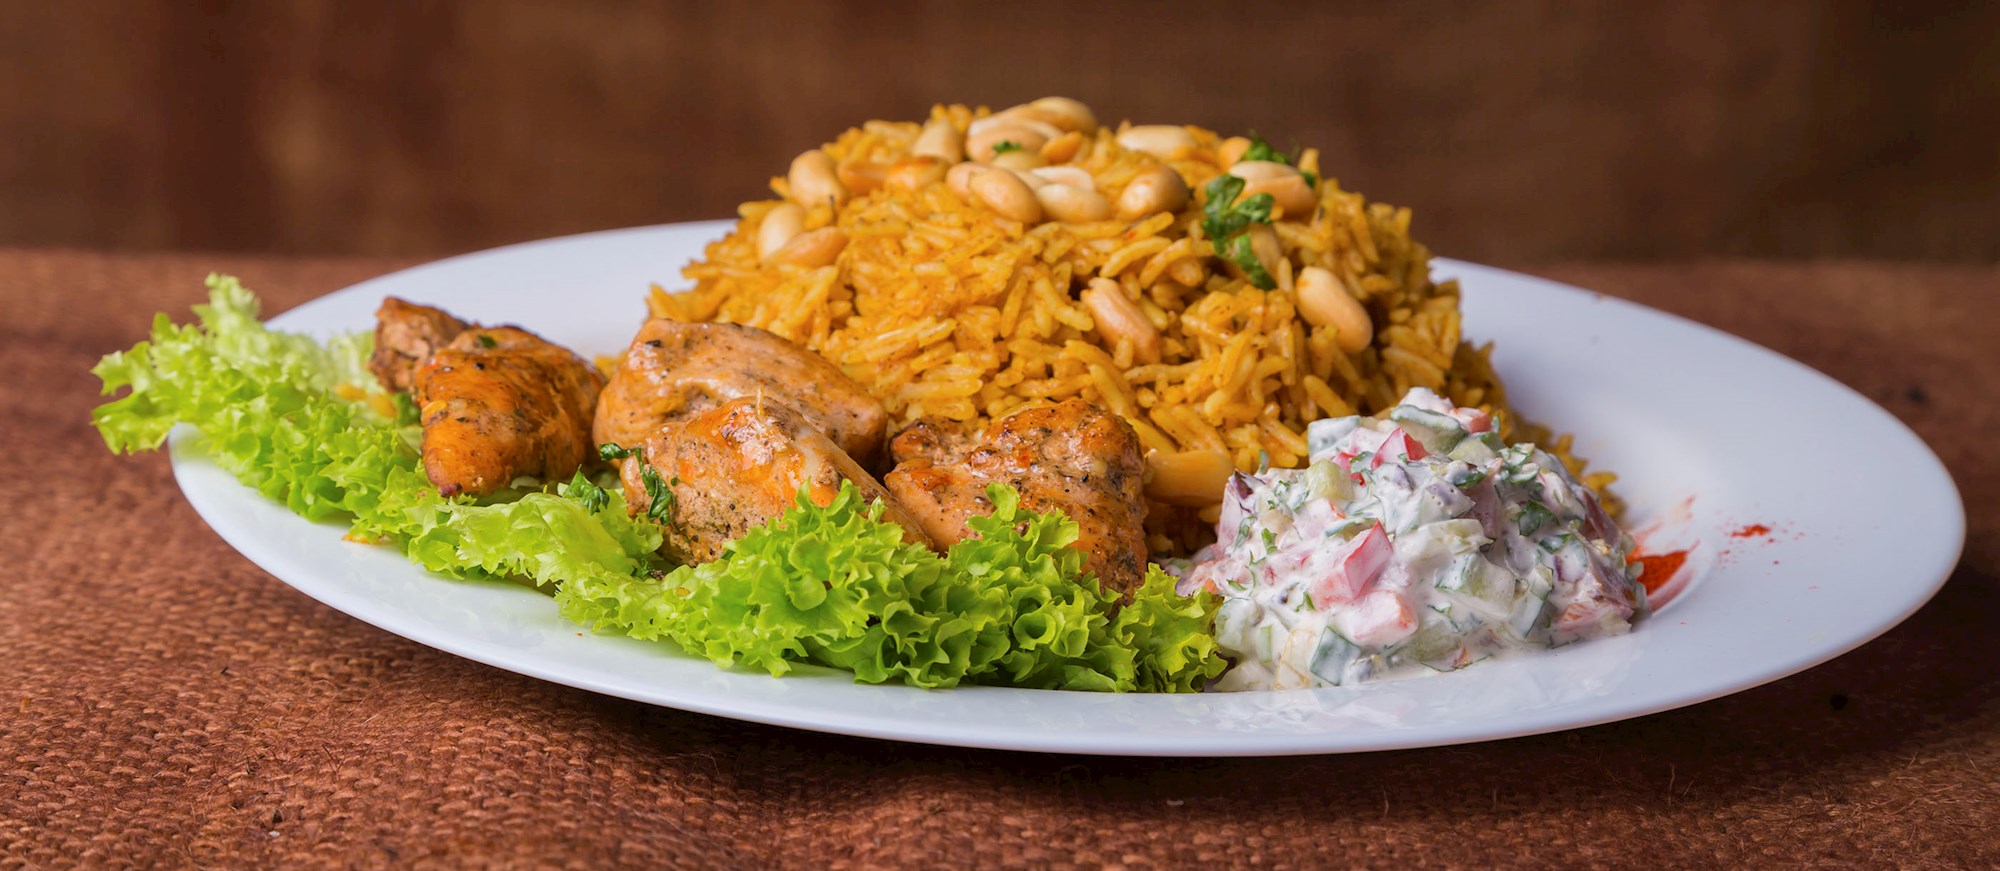 Where to Eat the Best Kabsa in the World? | TasteAtlas